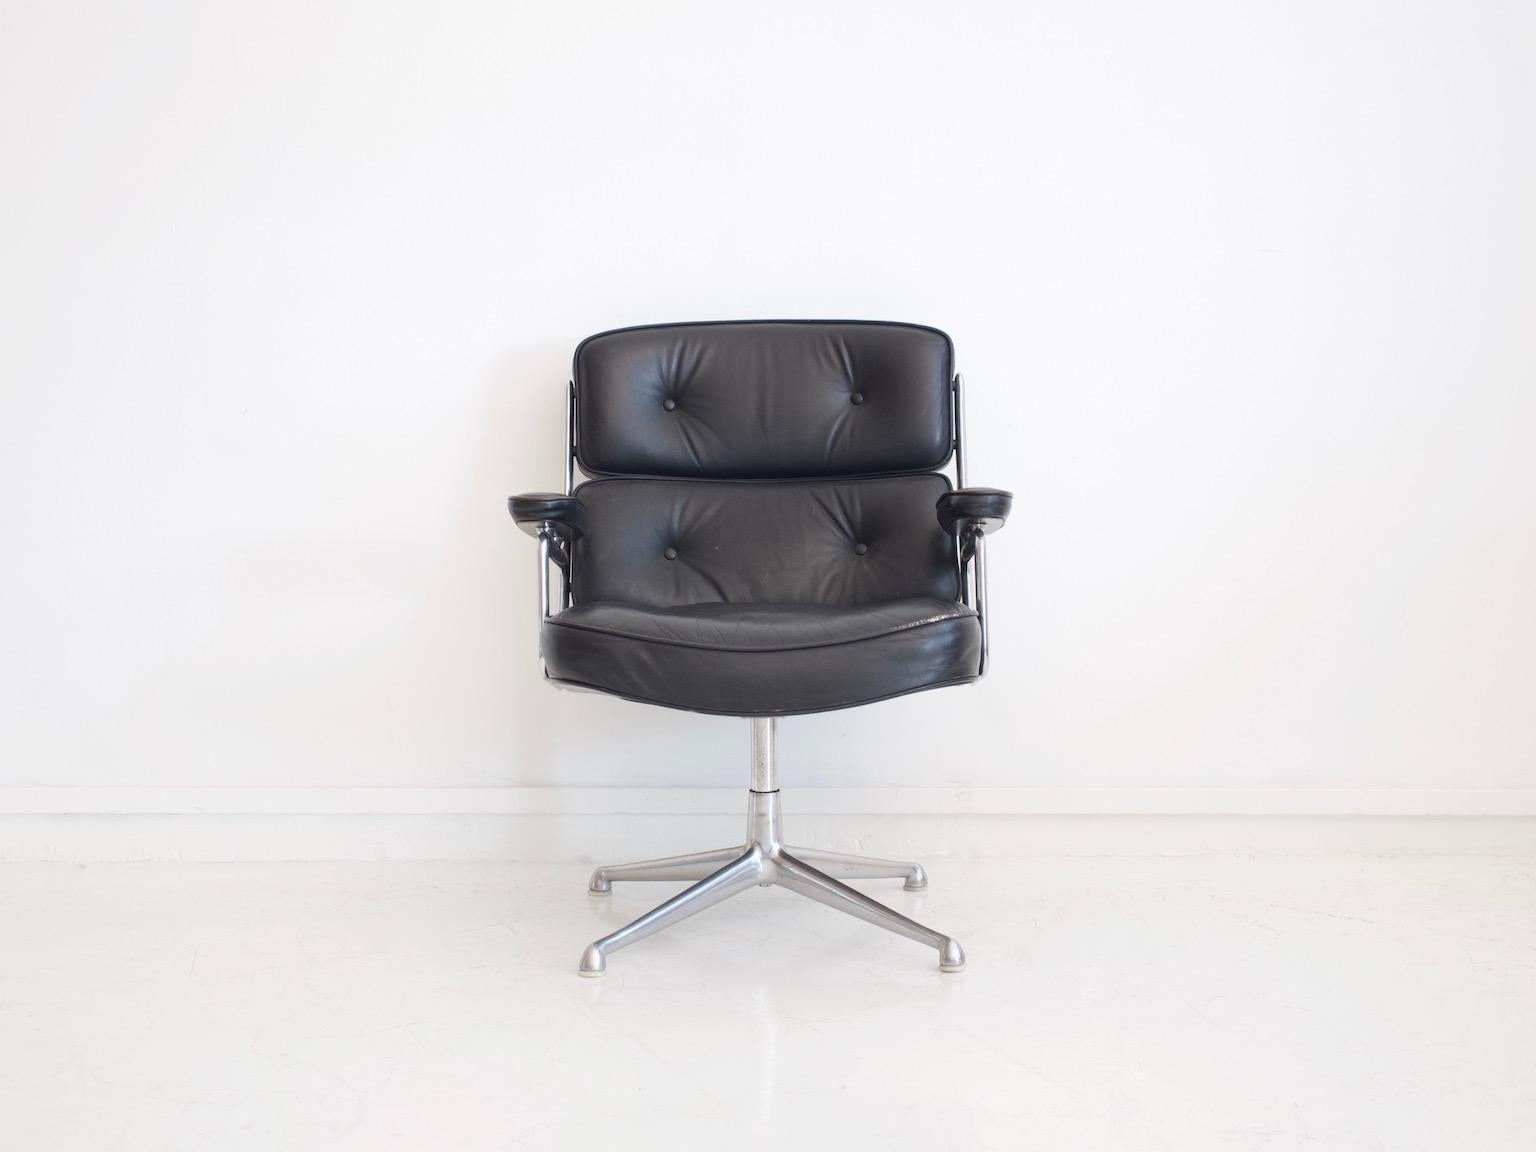 Black leather upholstered swivel armchair designed by Charles & Ray Eames, circa 1960, manufactured by Vitra / Herman Miller. Model: Lobby chair ES 108. It was designed in 1960 for the reception areas of the Time Life building in New York. Polished